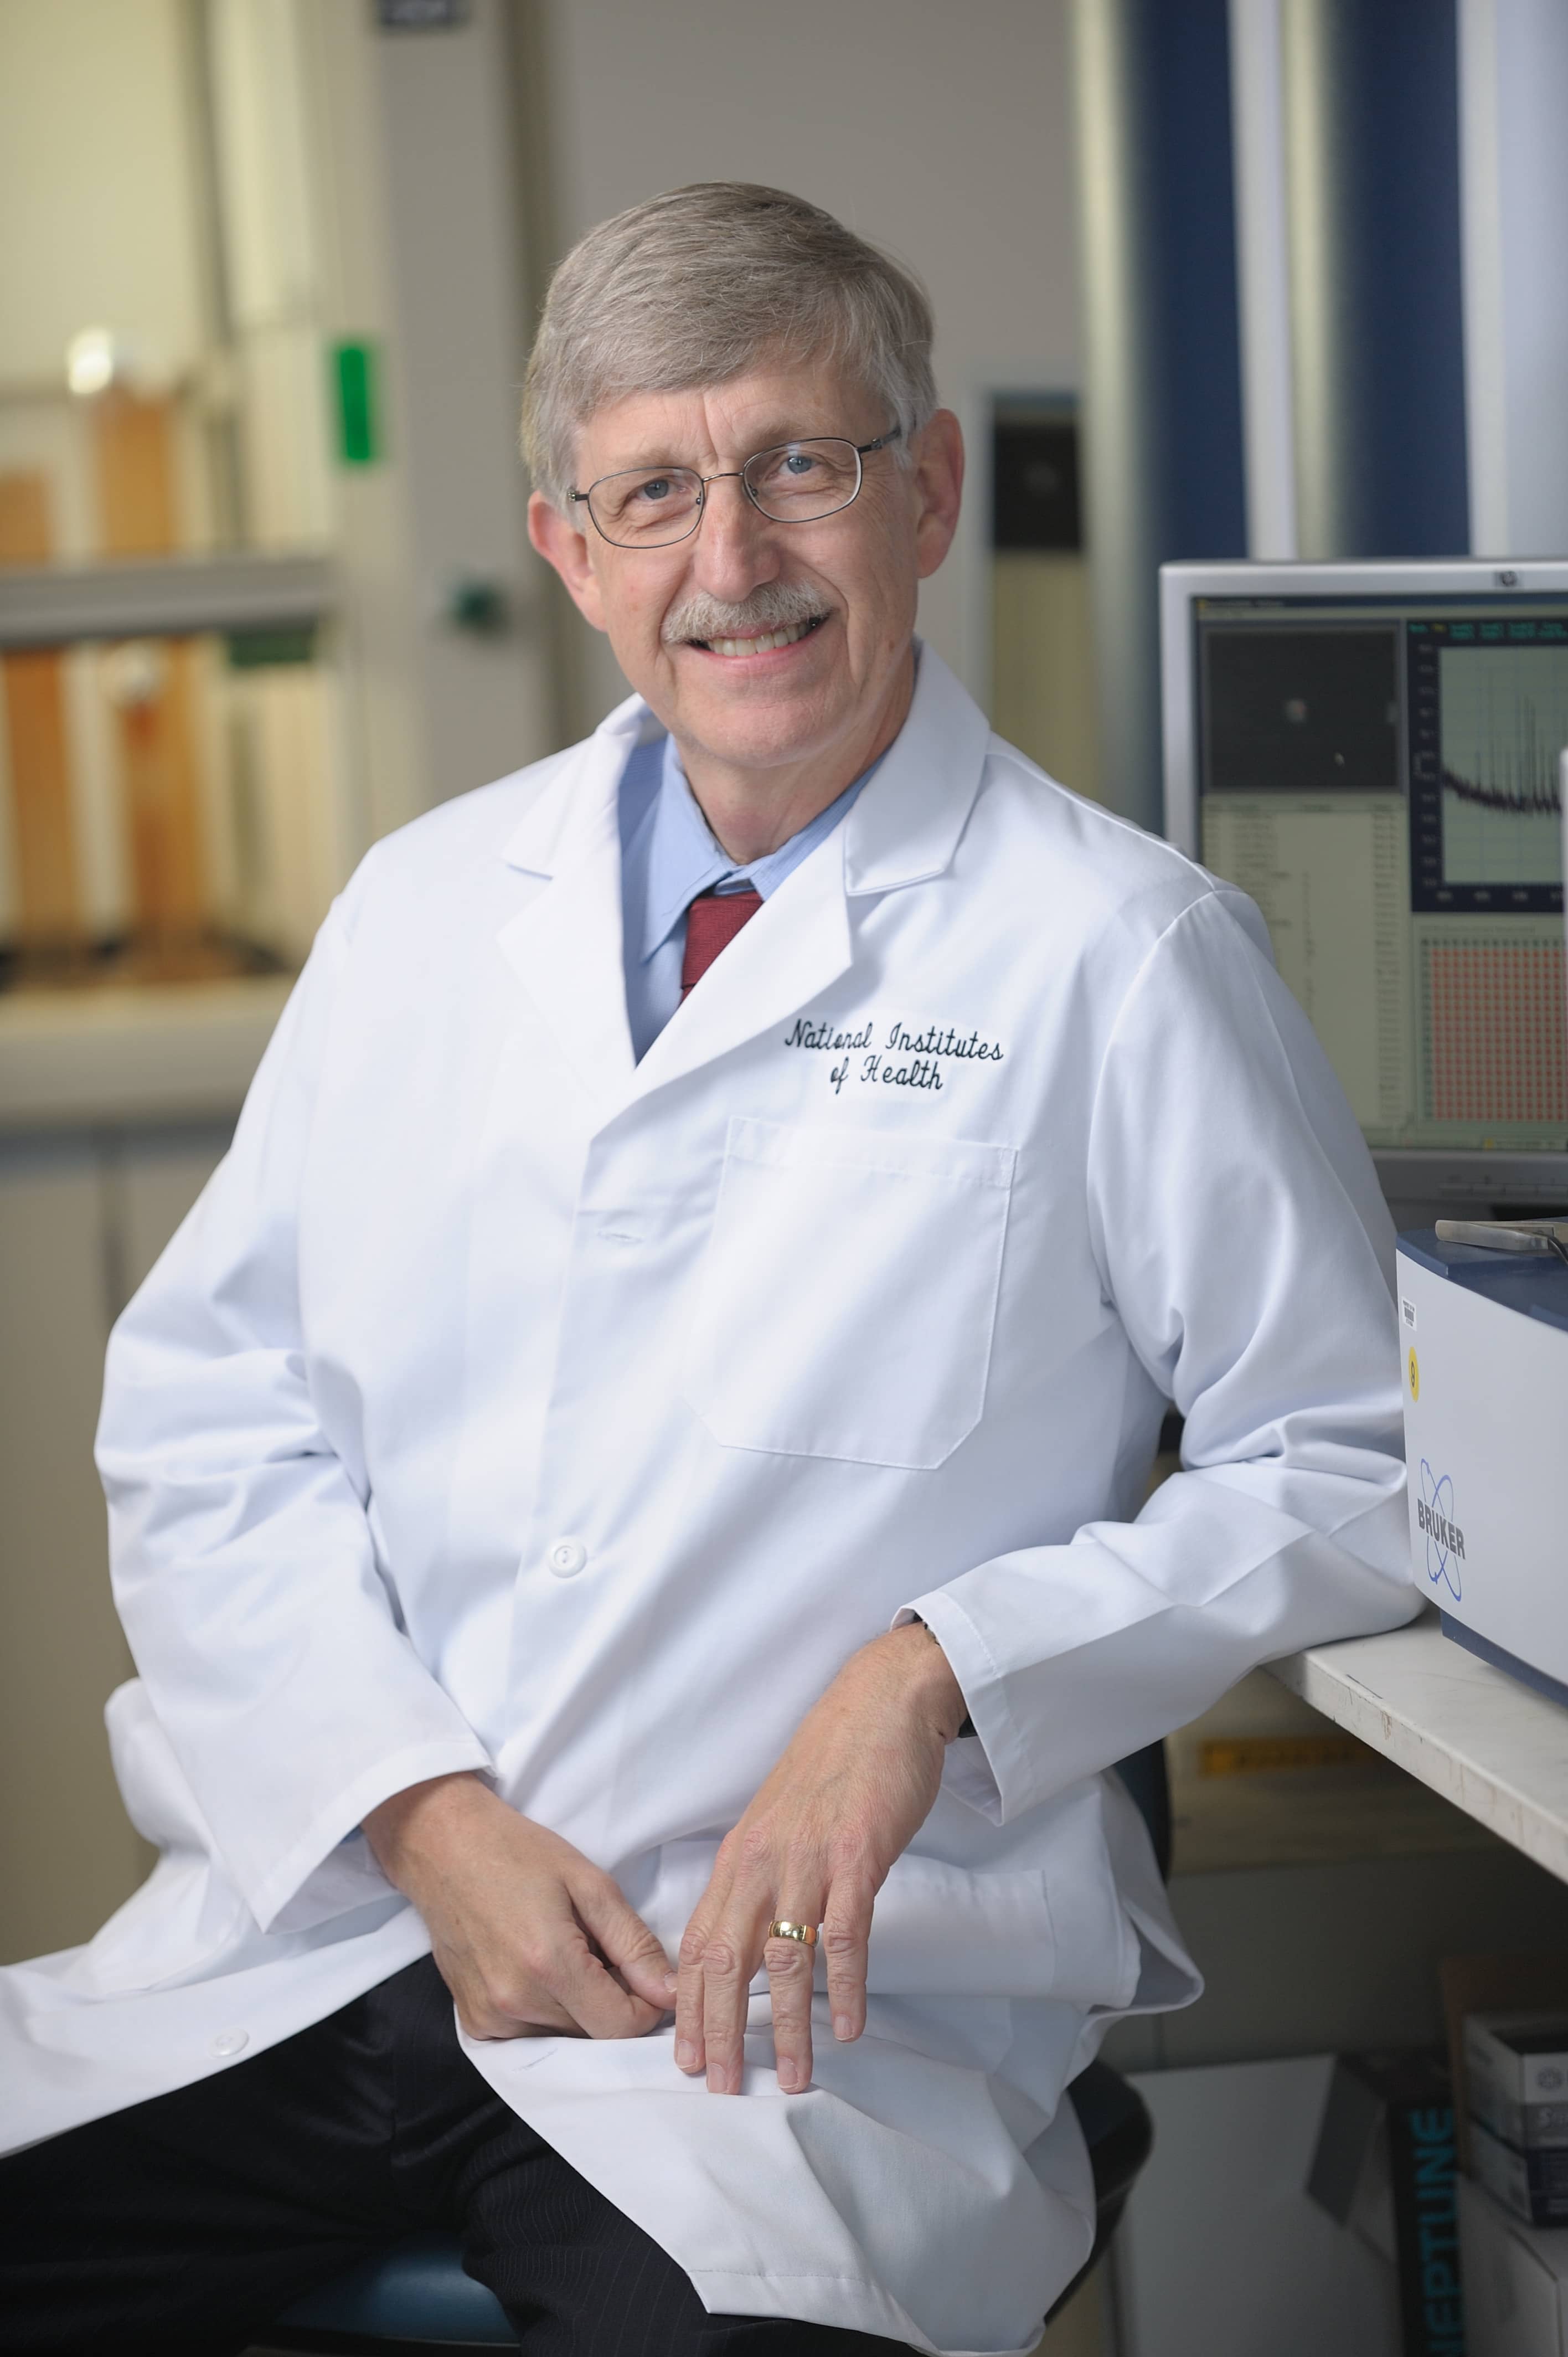 Dr. Francis Collins in his lab coat.